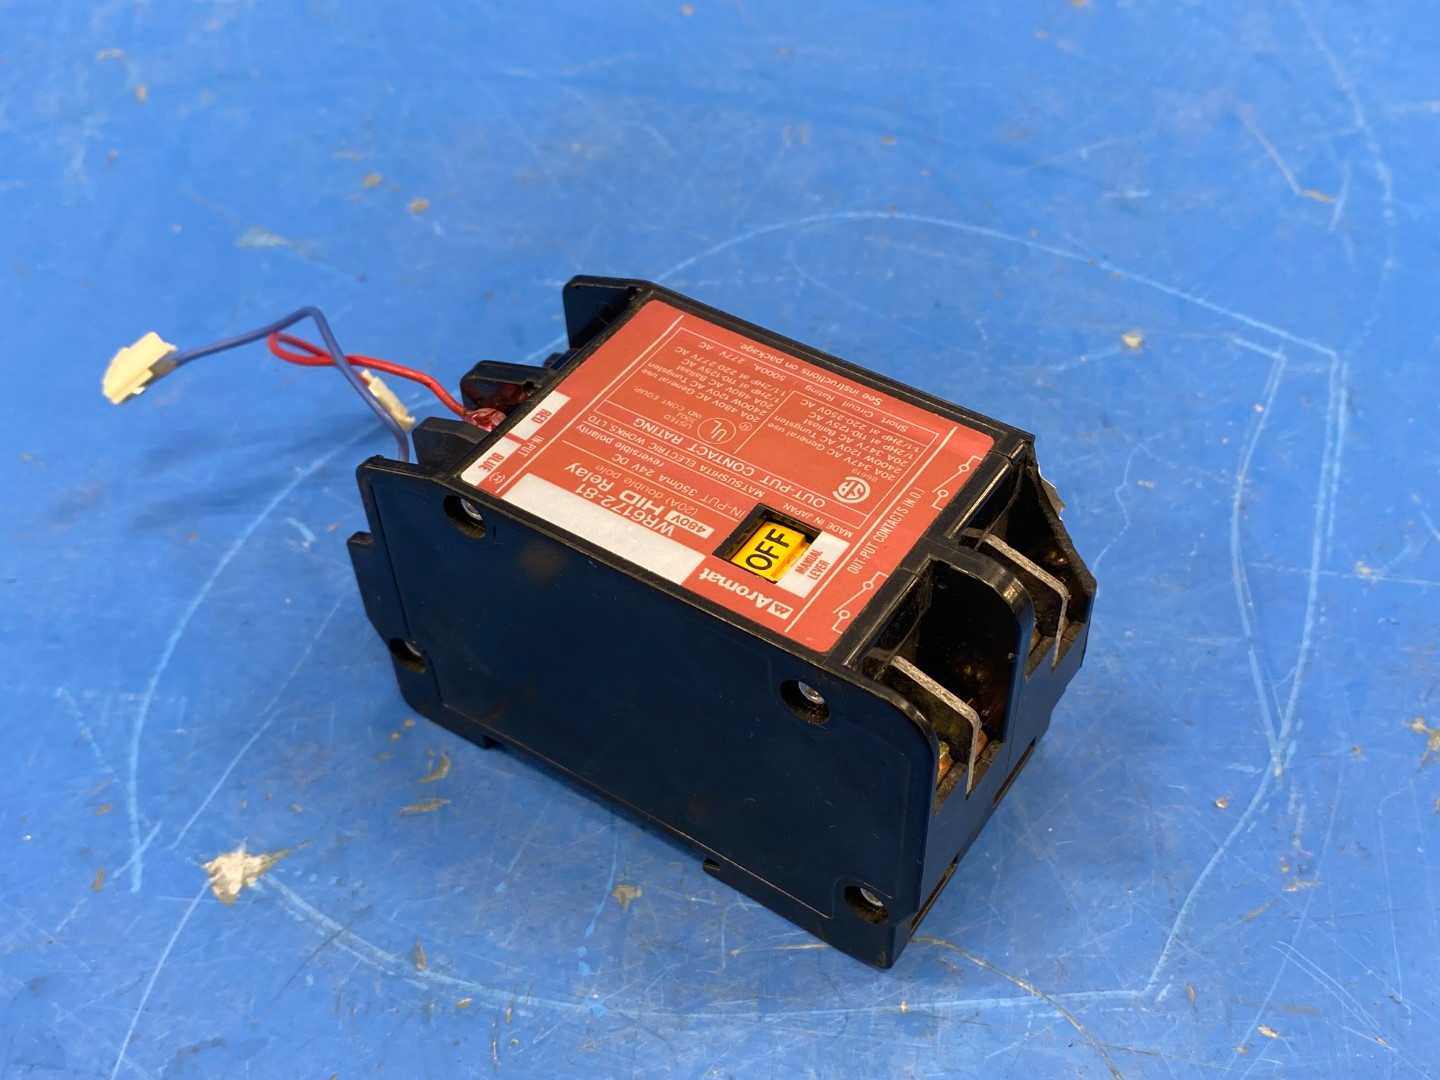 Aromat WR6172 HID Relay